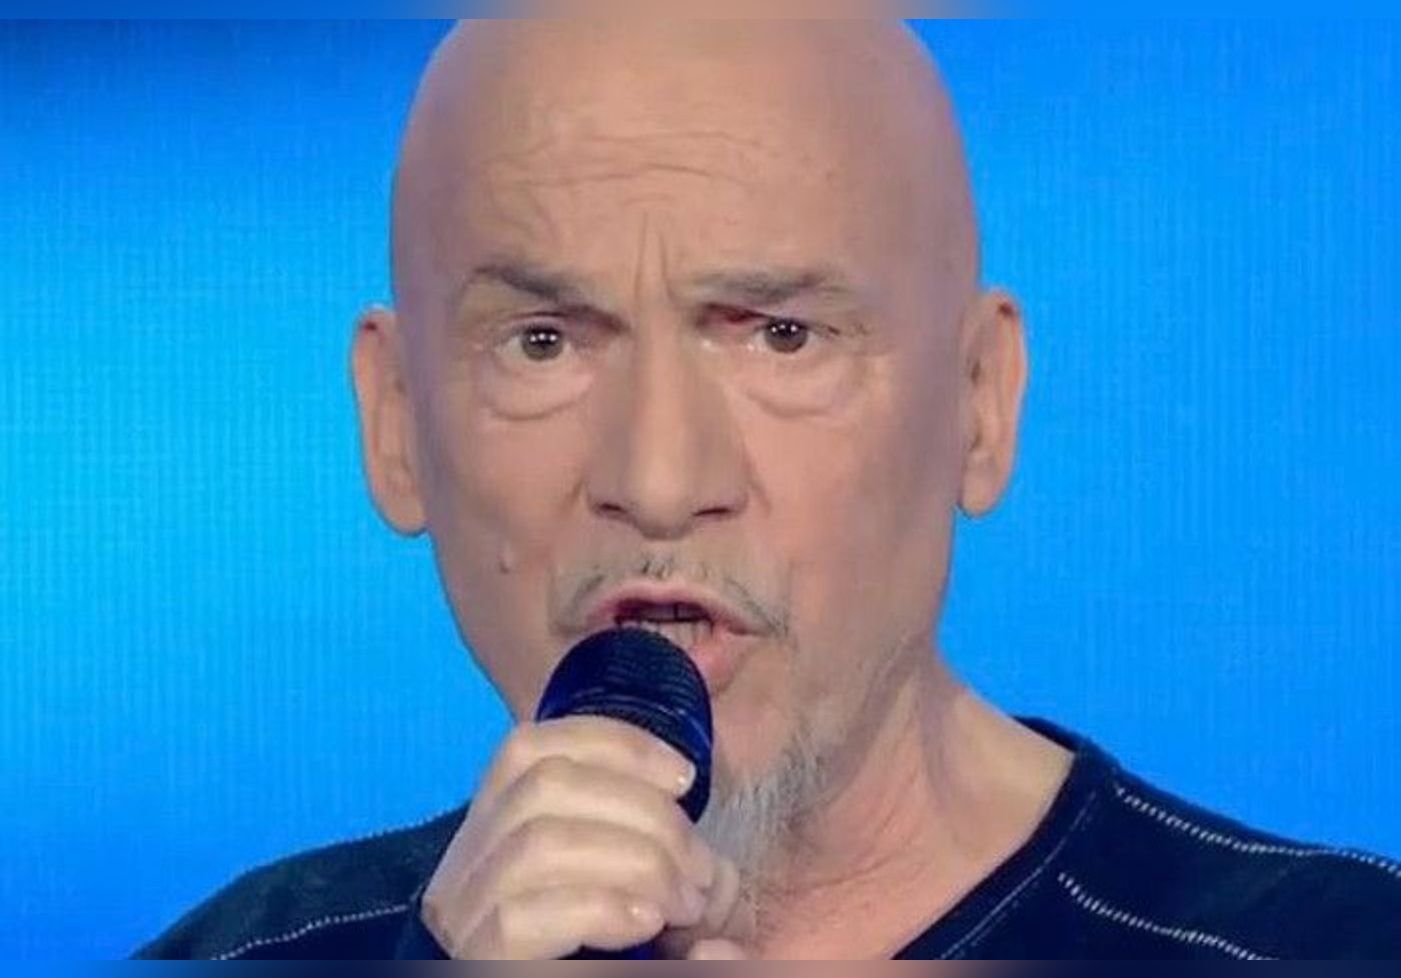 Florent Bagni, with a shaven head, surprises viewers at the “United for Ukraine” concert